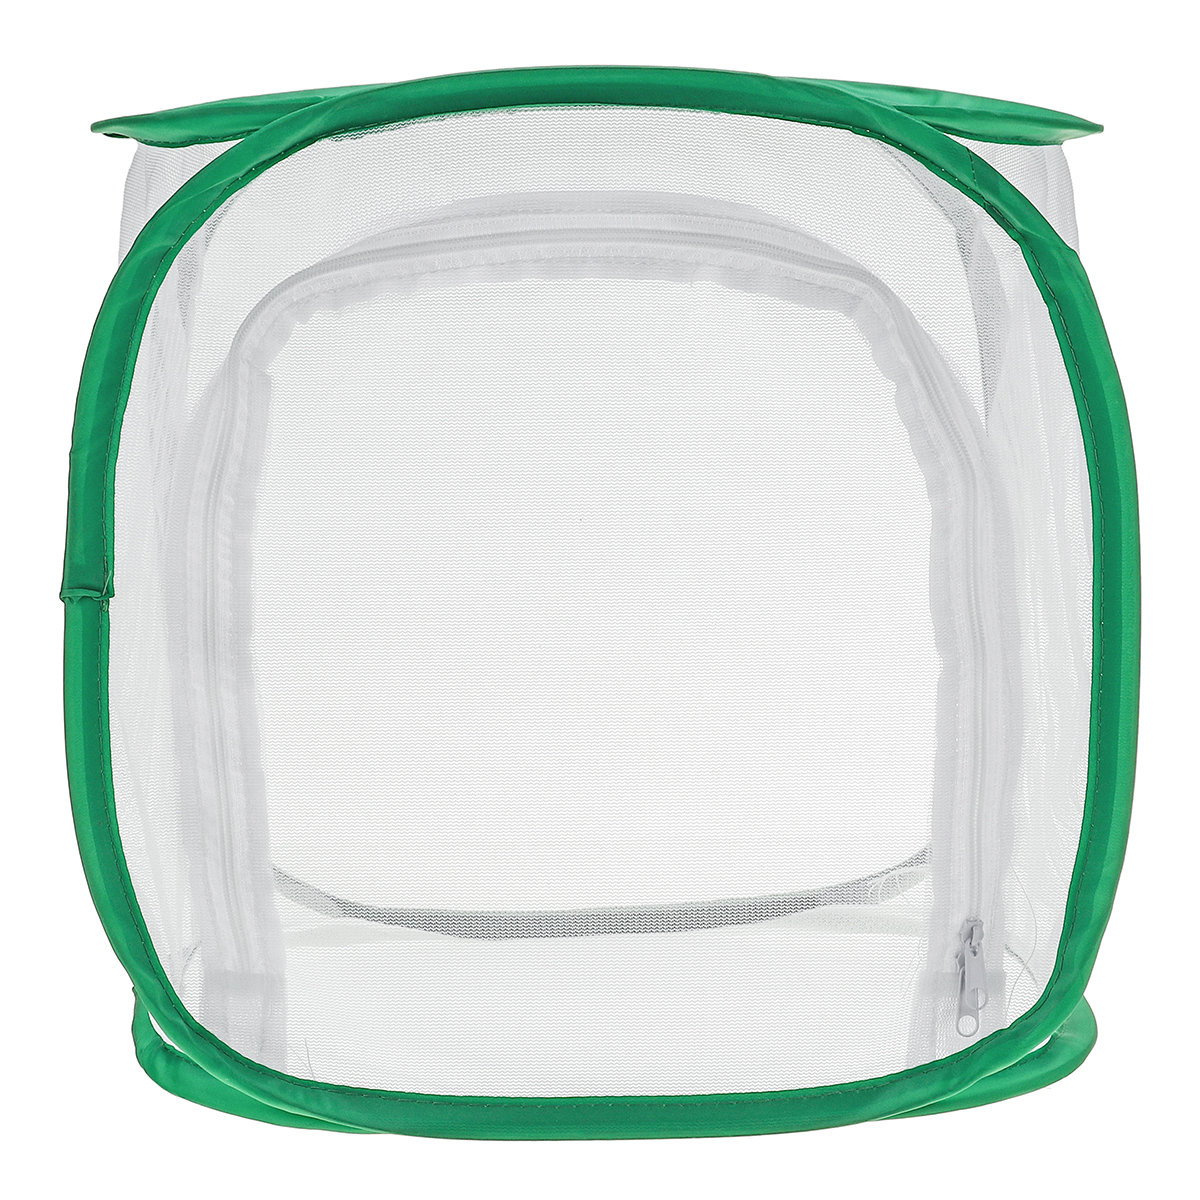 Green-Collapsible-Insect-Habitat-Cage-Butterfly-Mesh-Transparent-Surface-Portable-Zipper-Cage-Plant--1688452-10